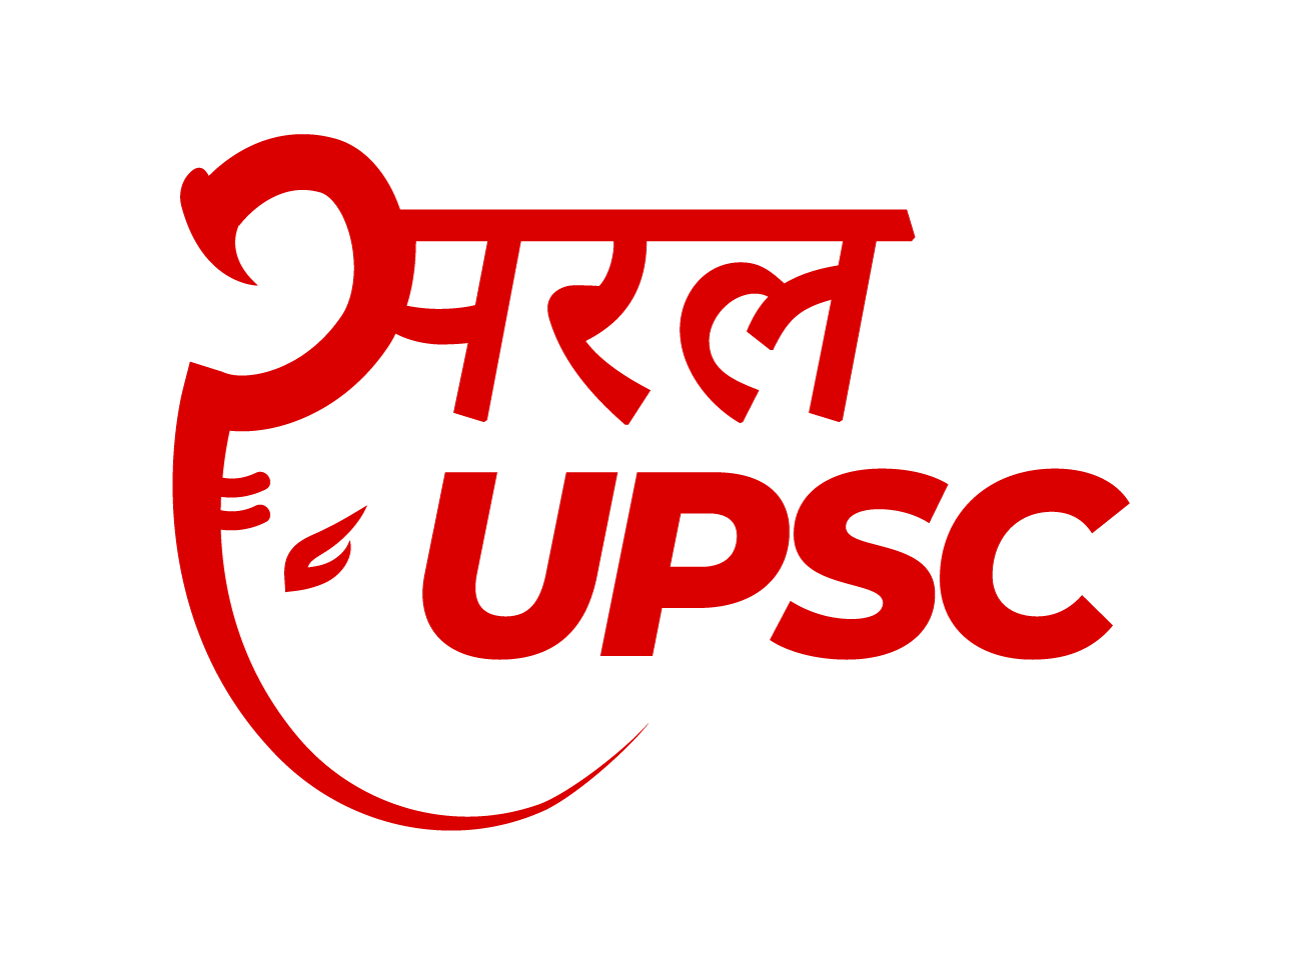 UPSC CLEAR: UPSC Preparation - Apps on Google Play